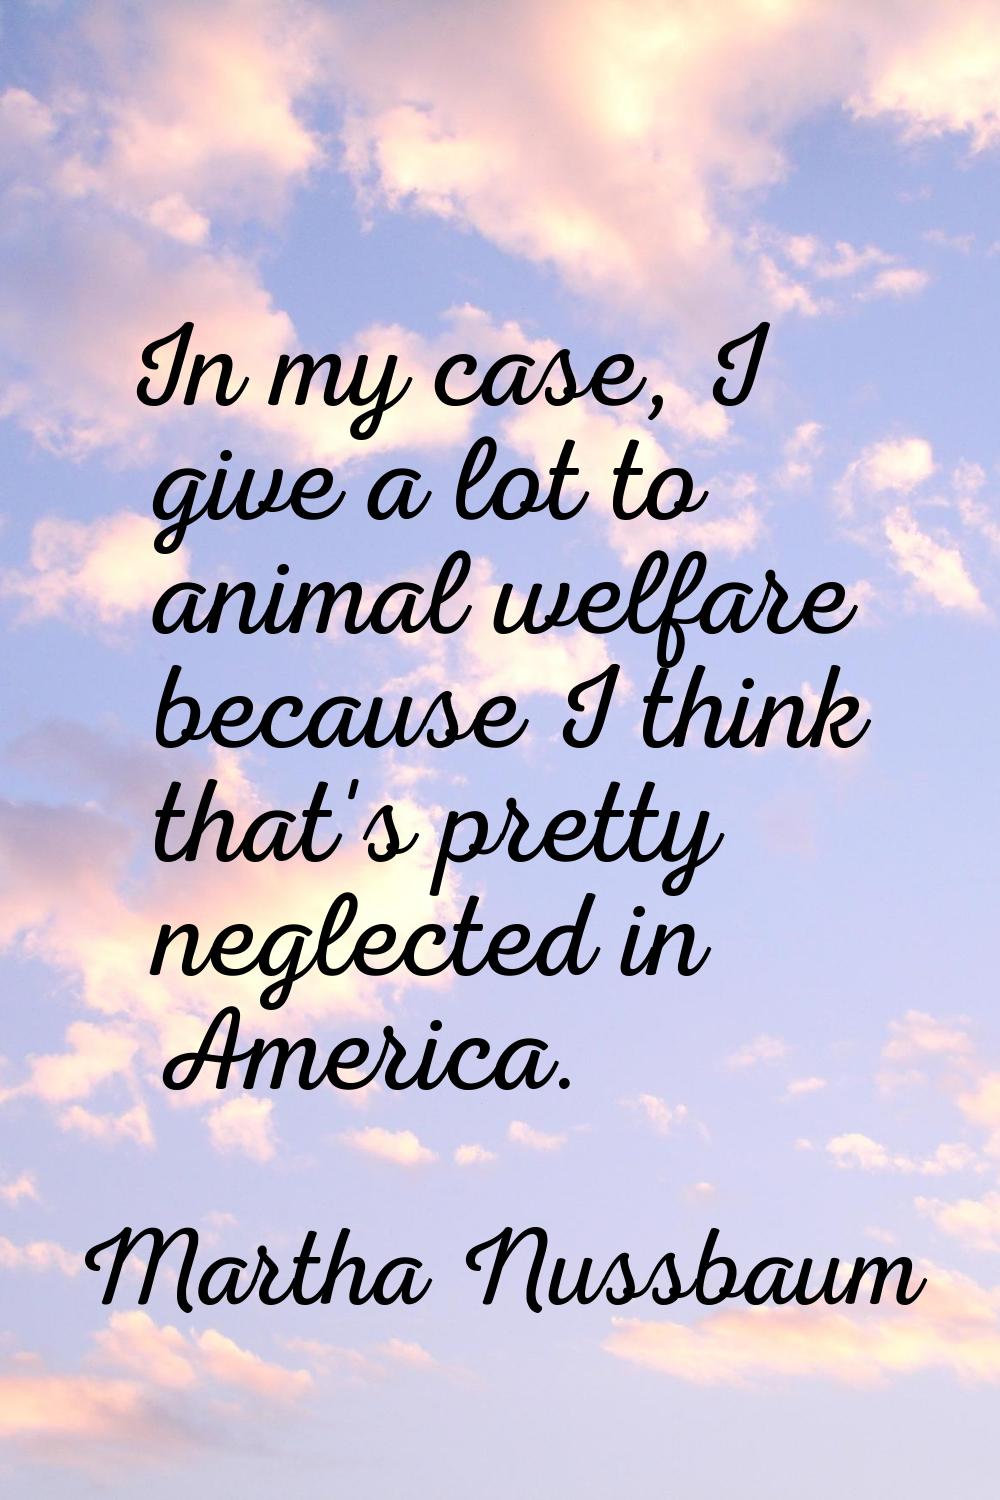 In my case, I give a lot to animal welfare because I think that's pretty neglected in America.